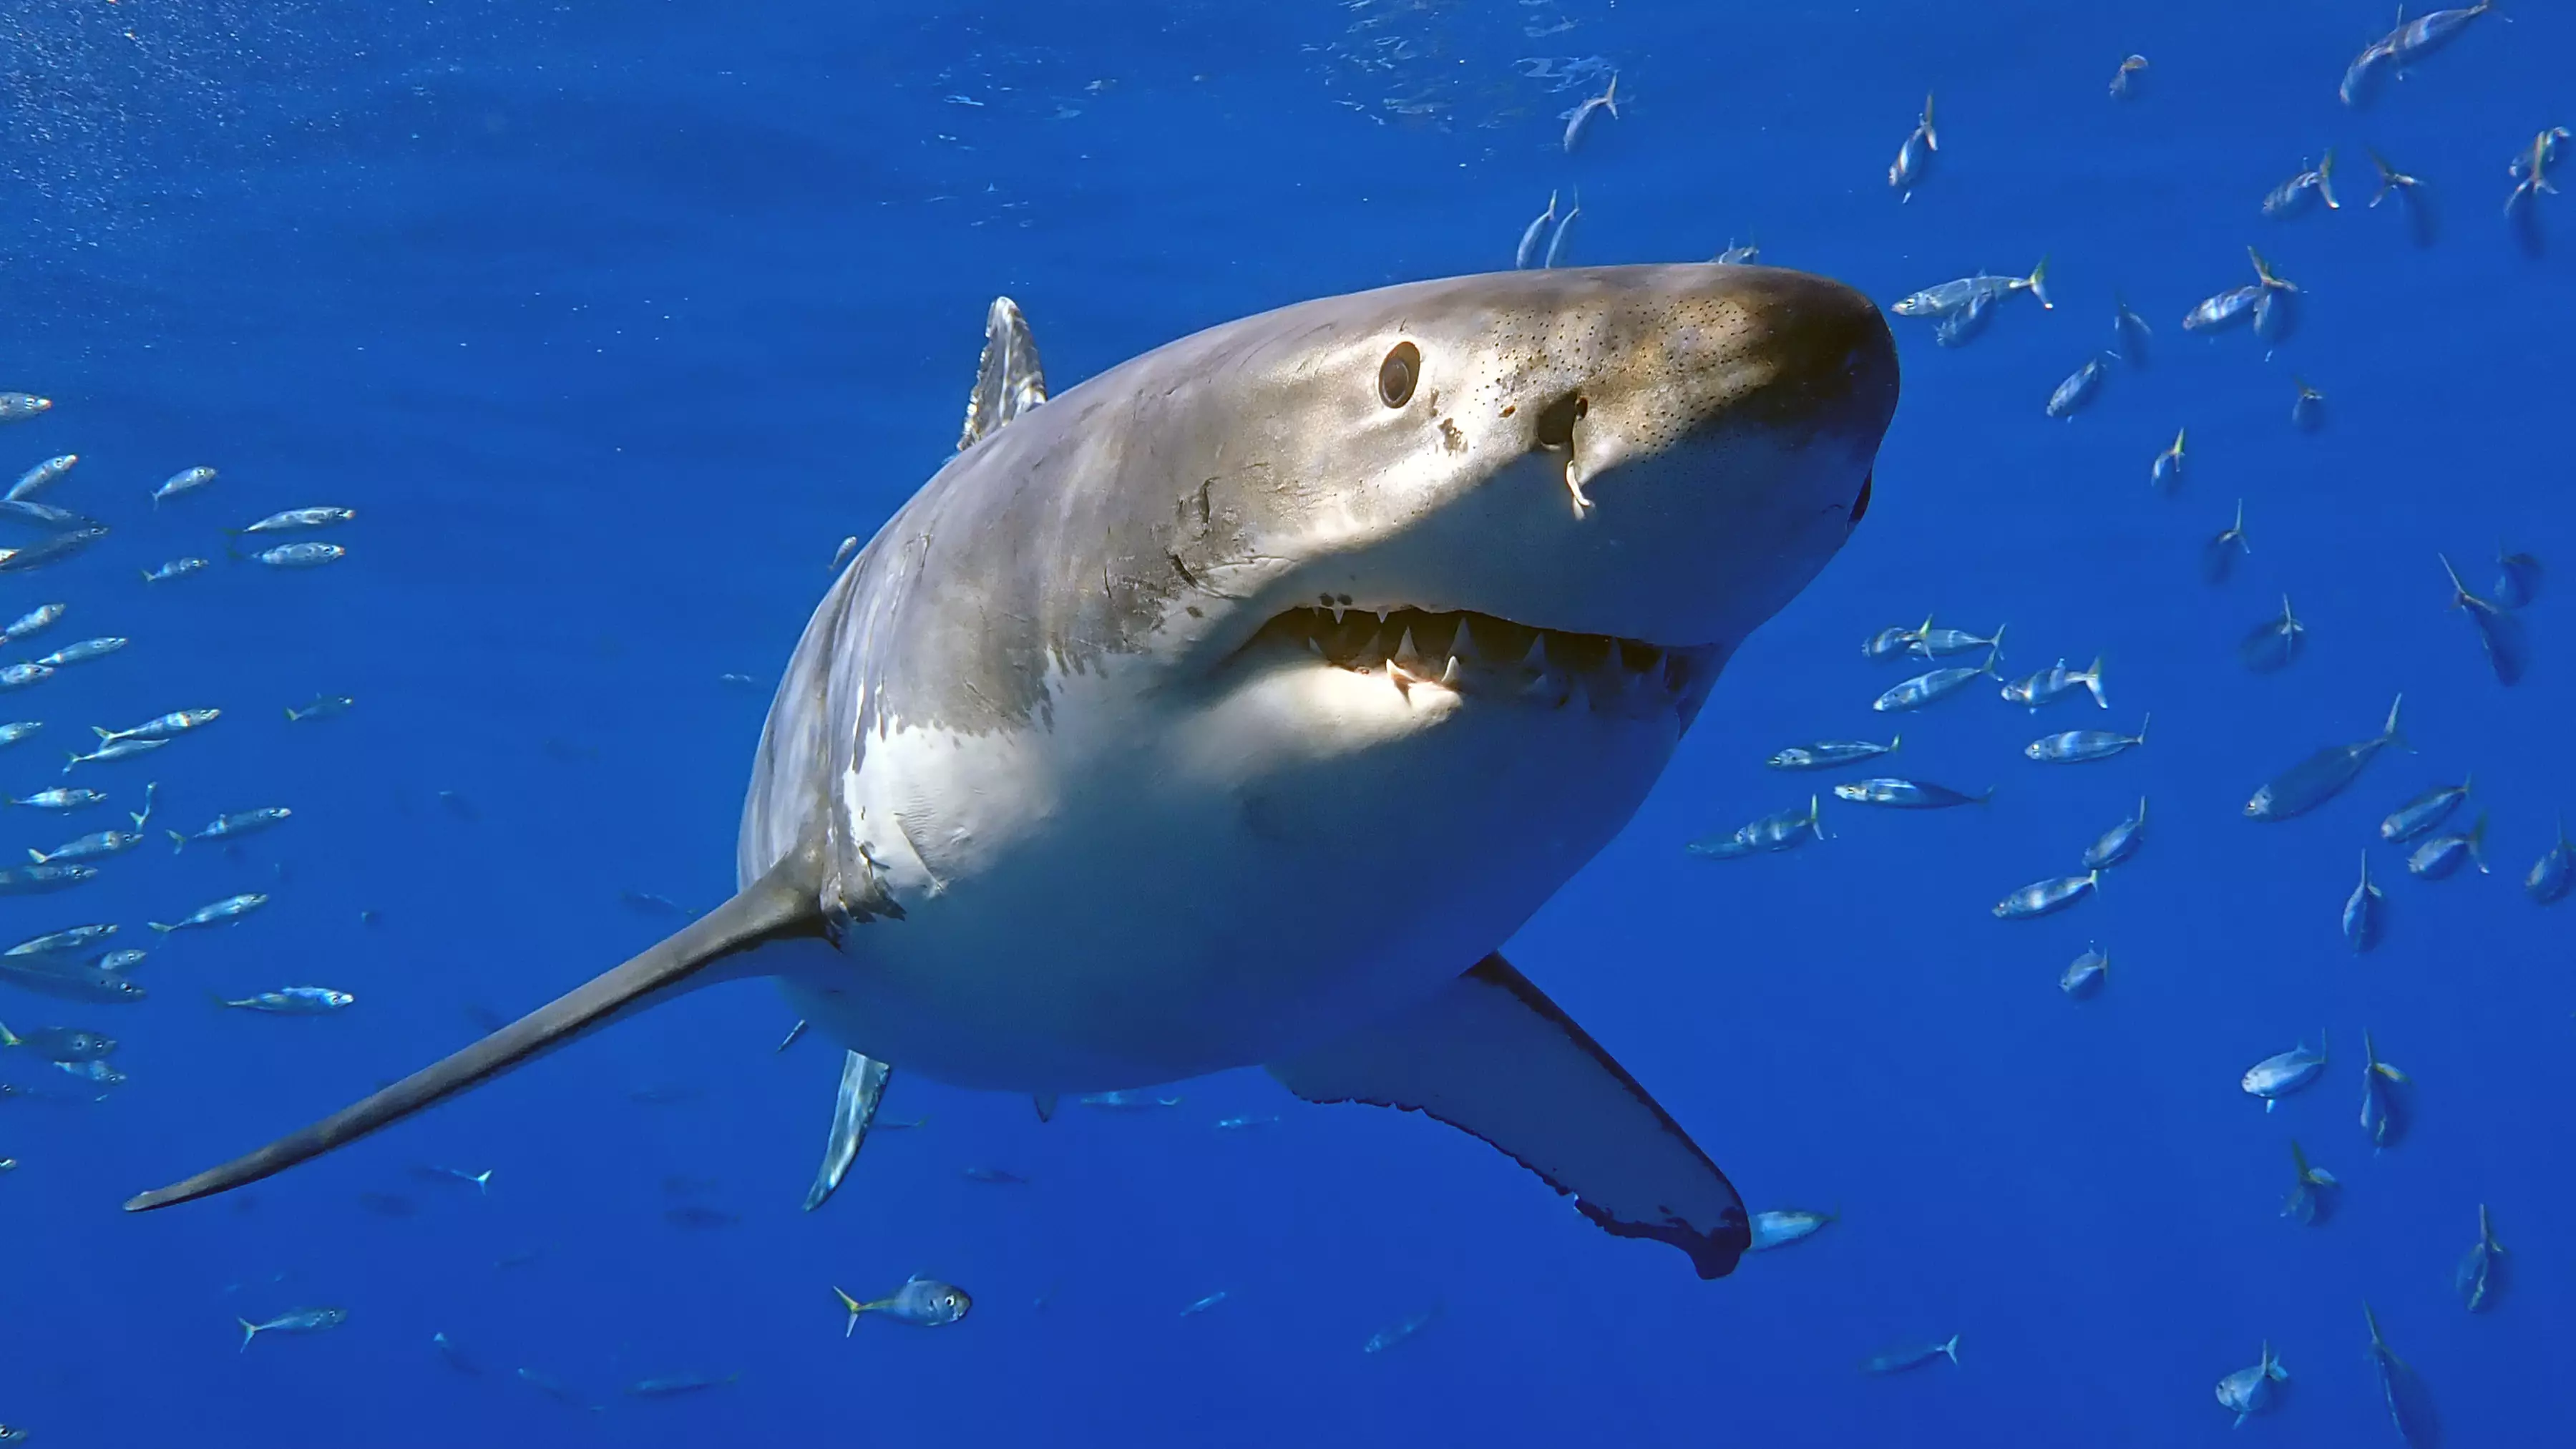 Two Men Saved After Spending The Night In Shark-Infested Waters